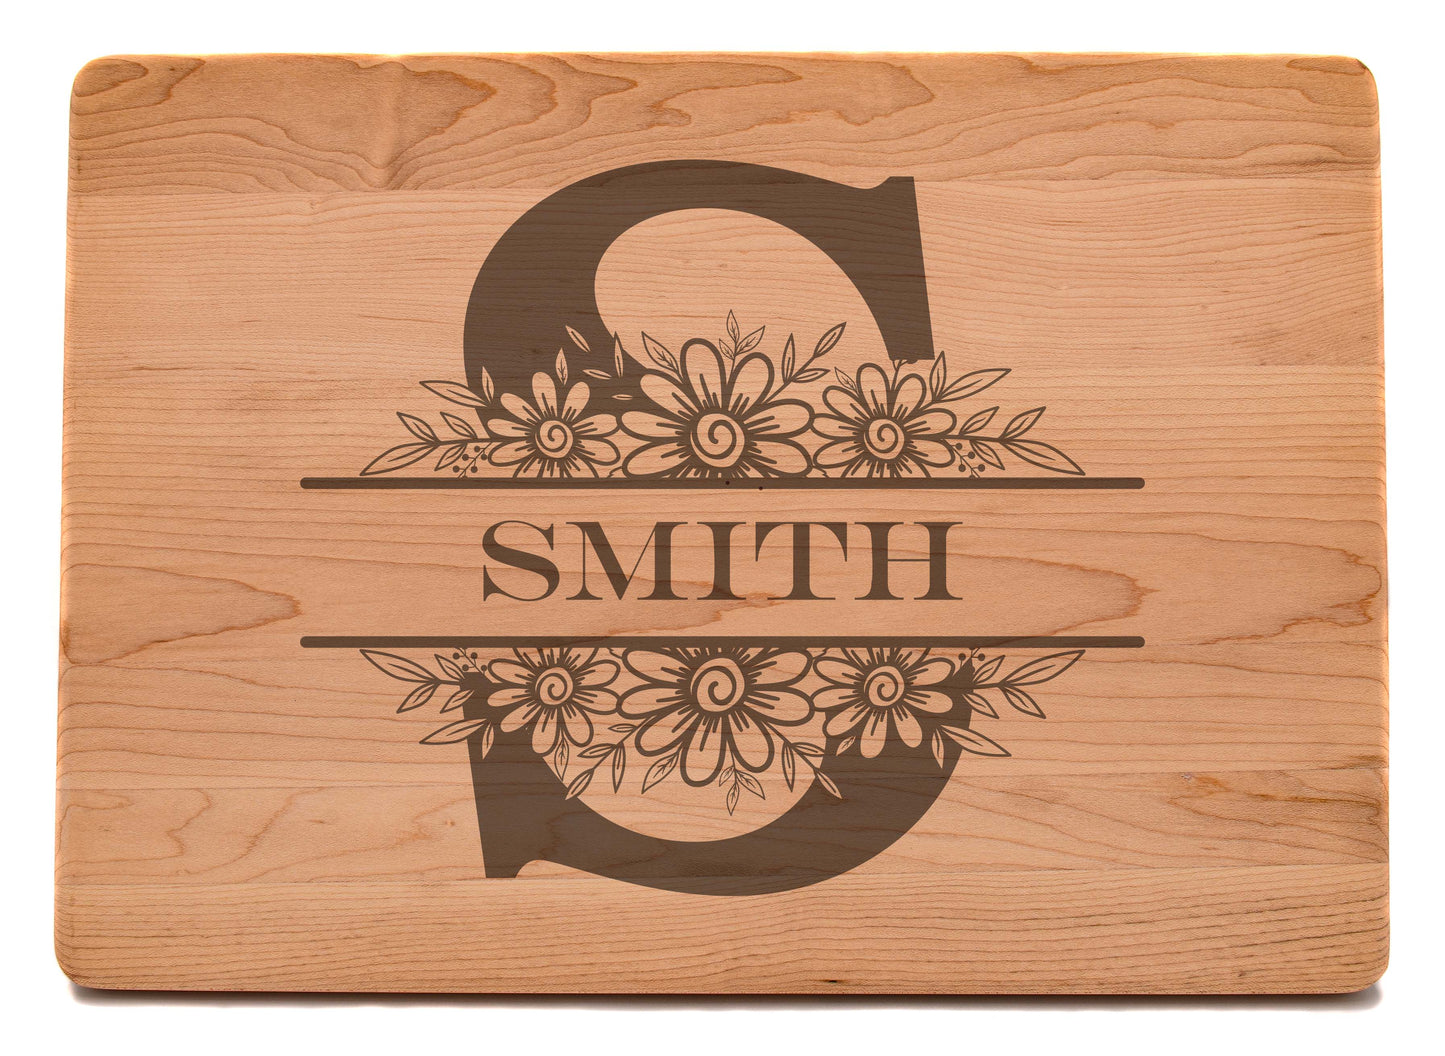 Custom Monogram Engraved Large Maple Cutting Board with Juice Groove 13-3/4" x 9-3/4